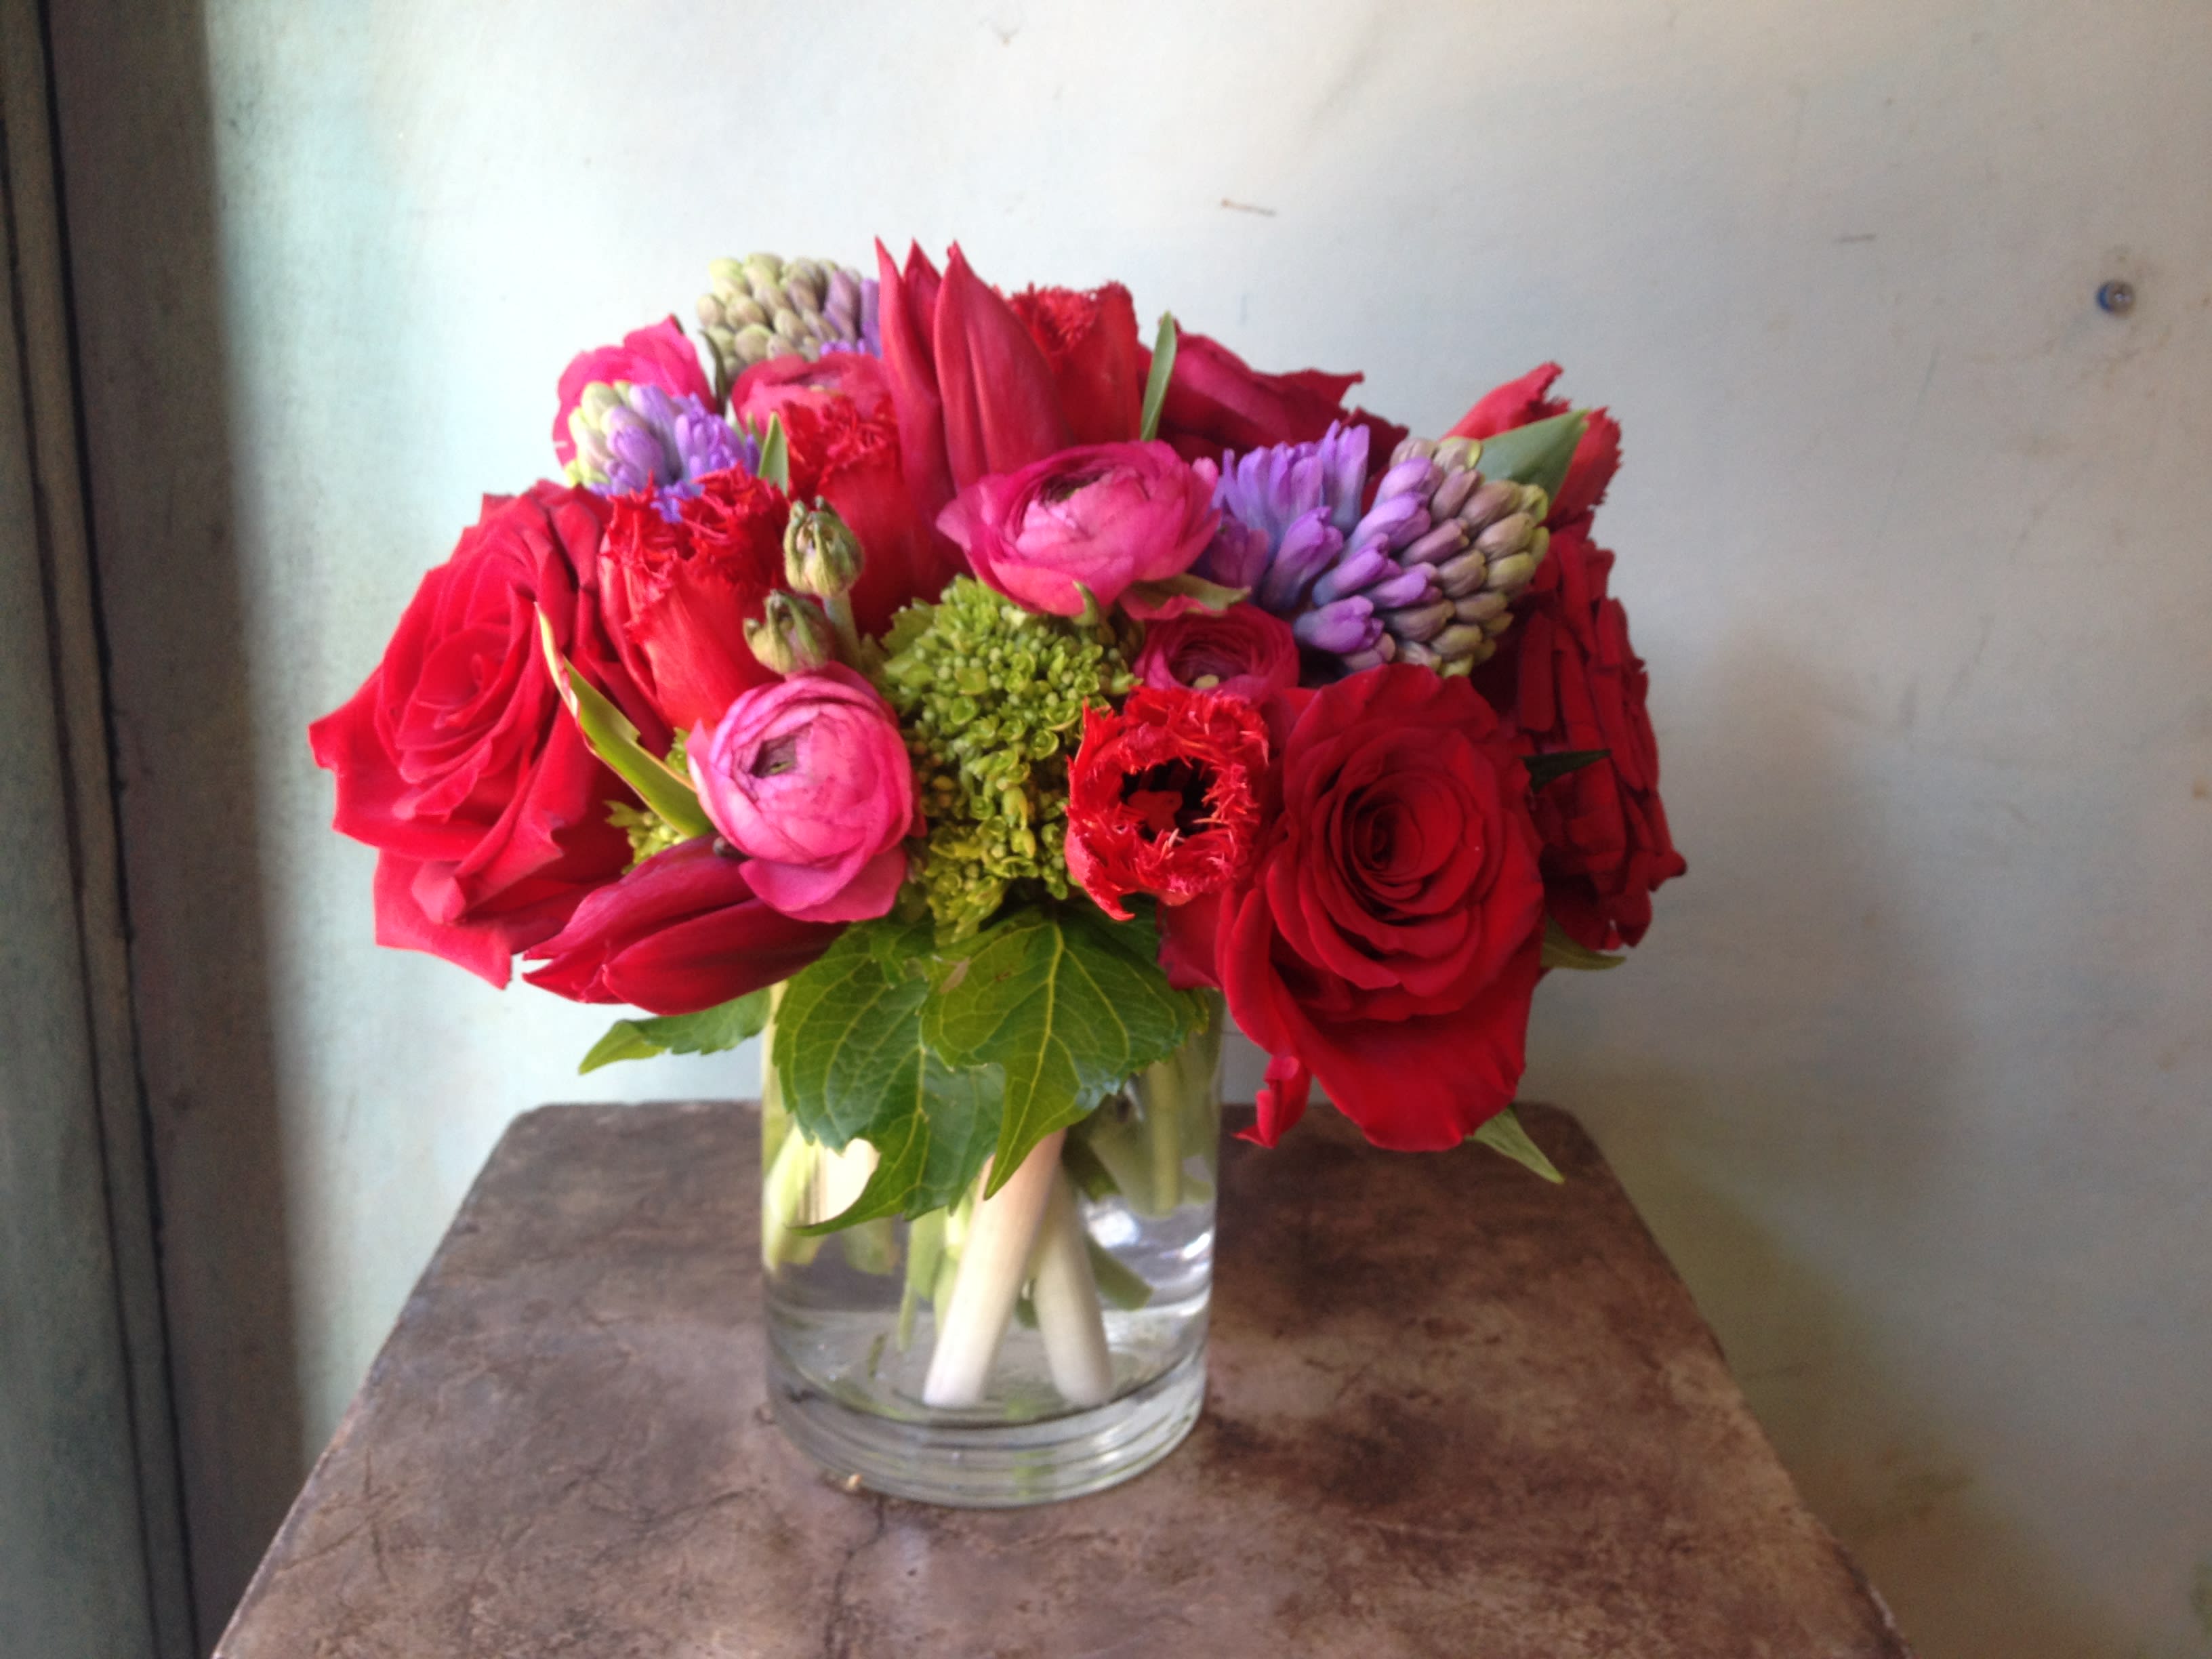 Red Arrangement - Vividly red and romantic